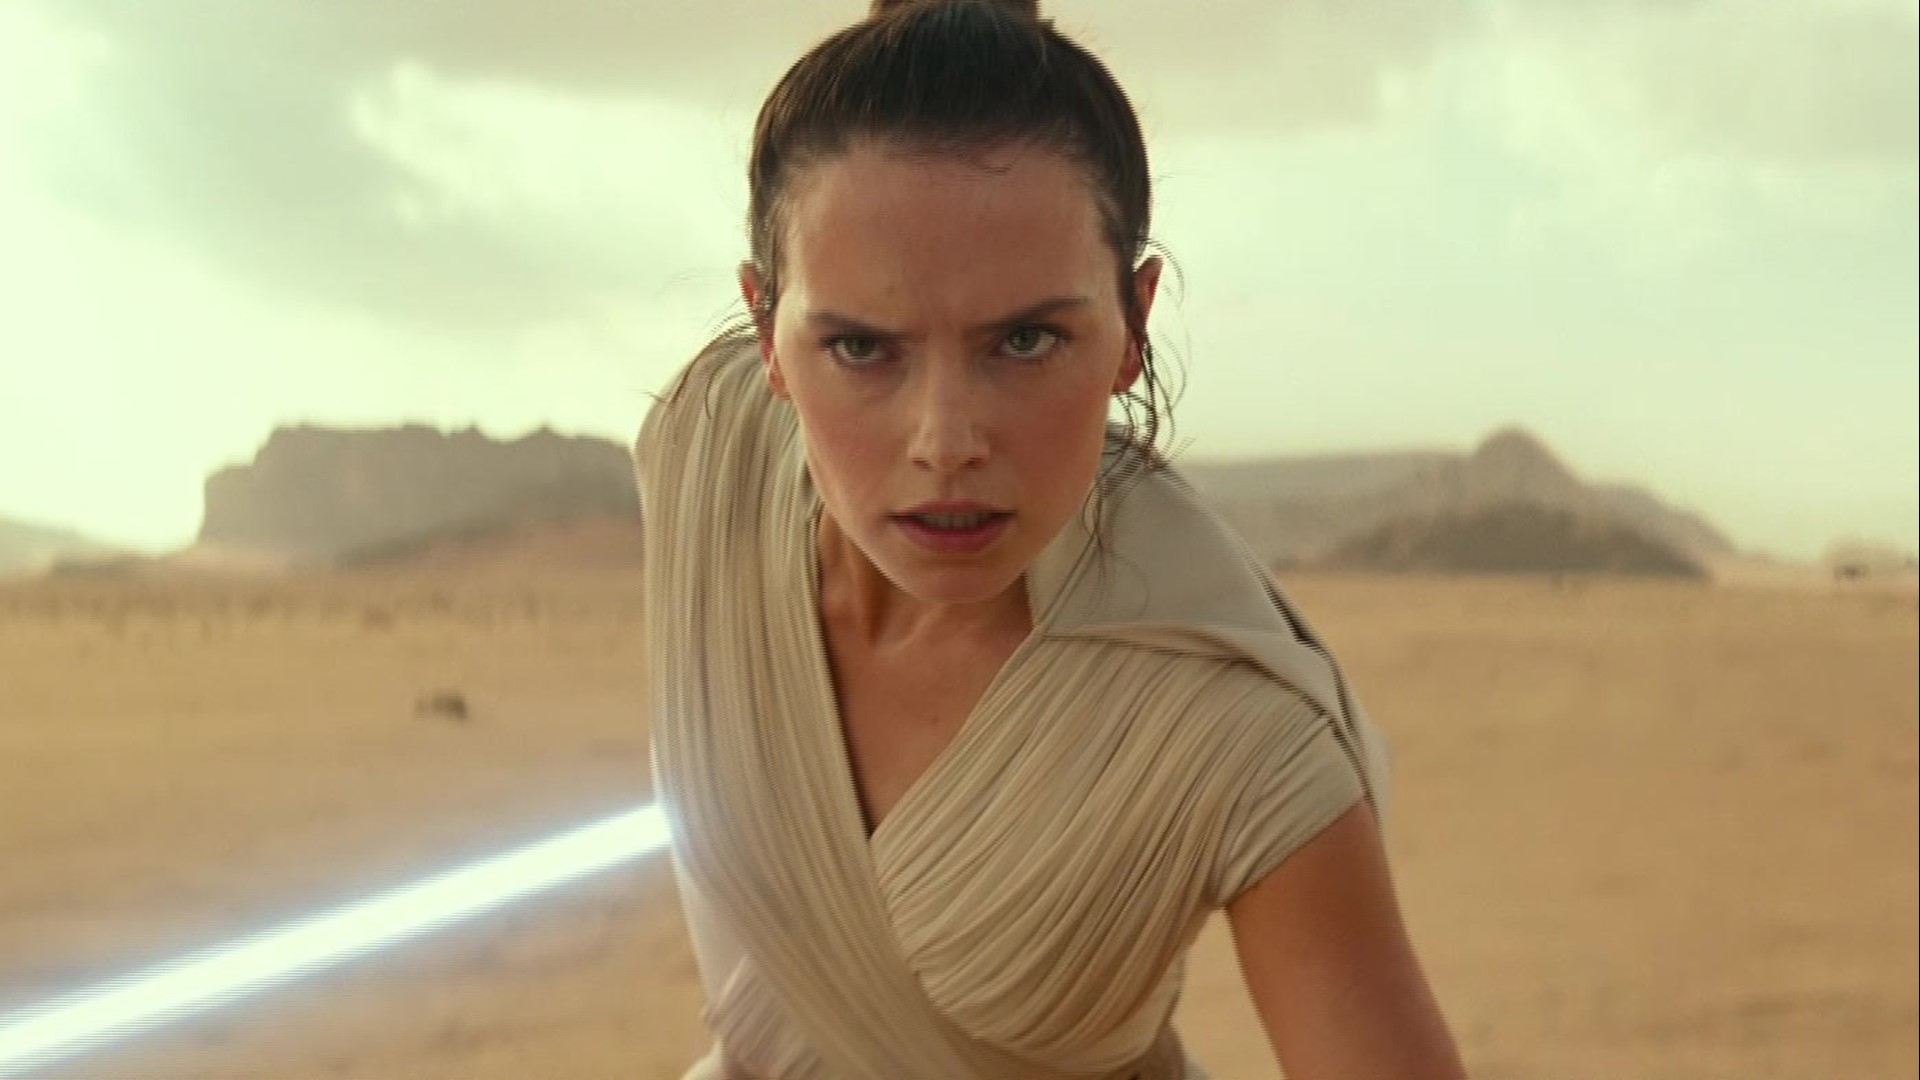 There's a lot to handle in the first teaser trailer for 'Star Wars: The Rise of Skywalker.'